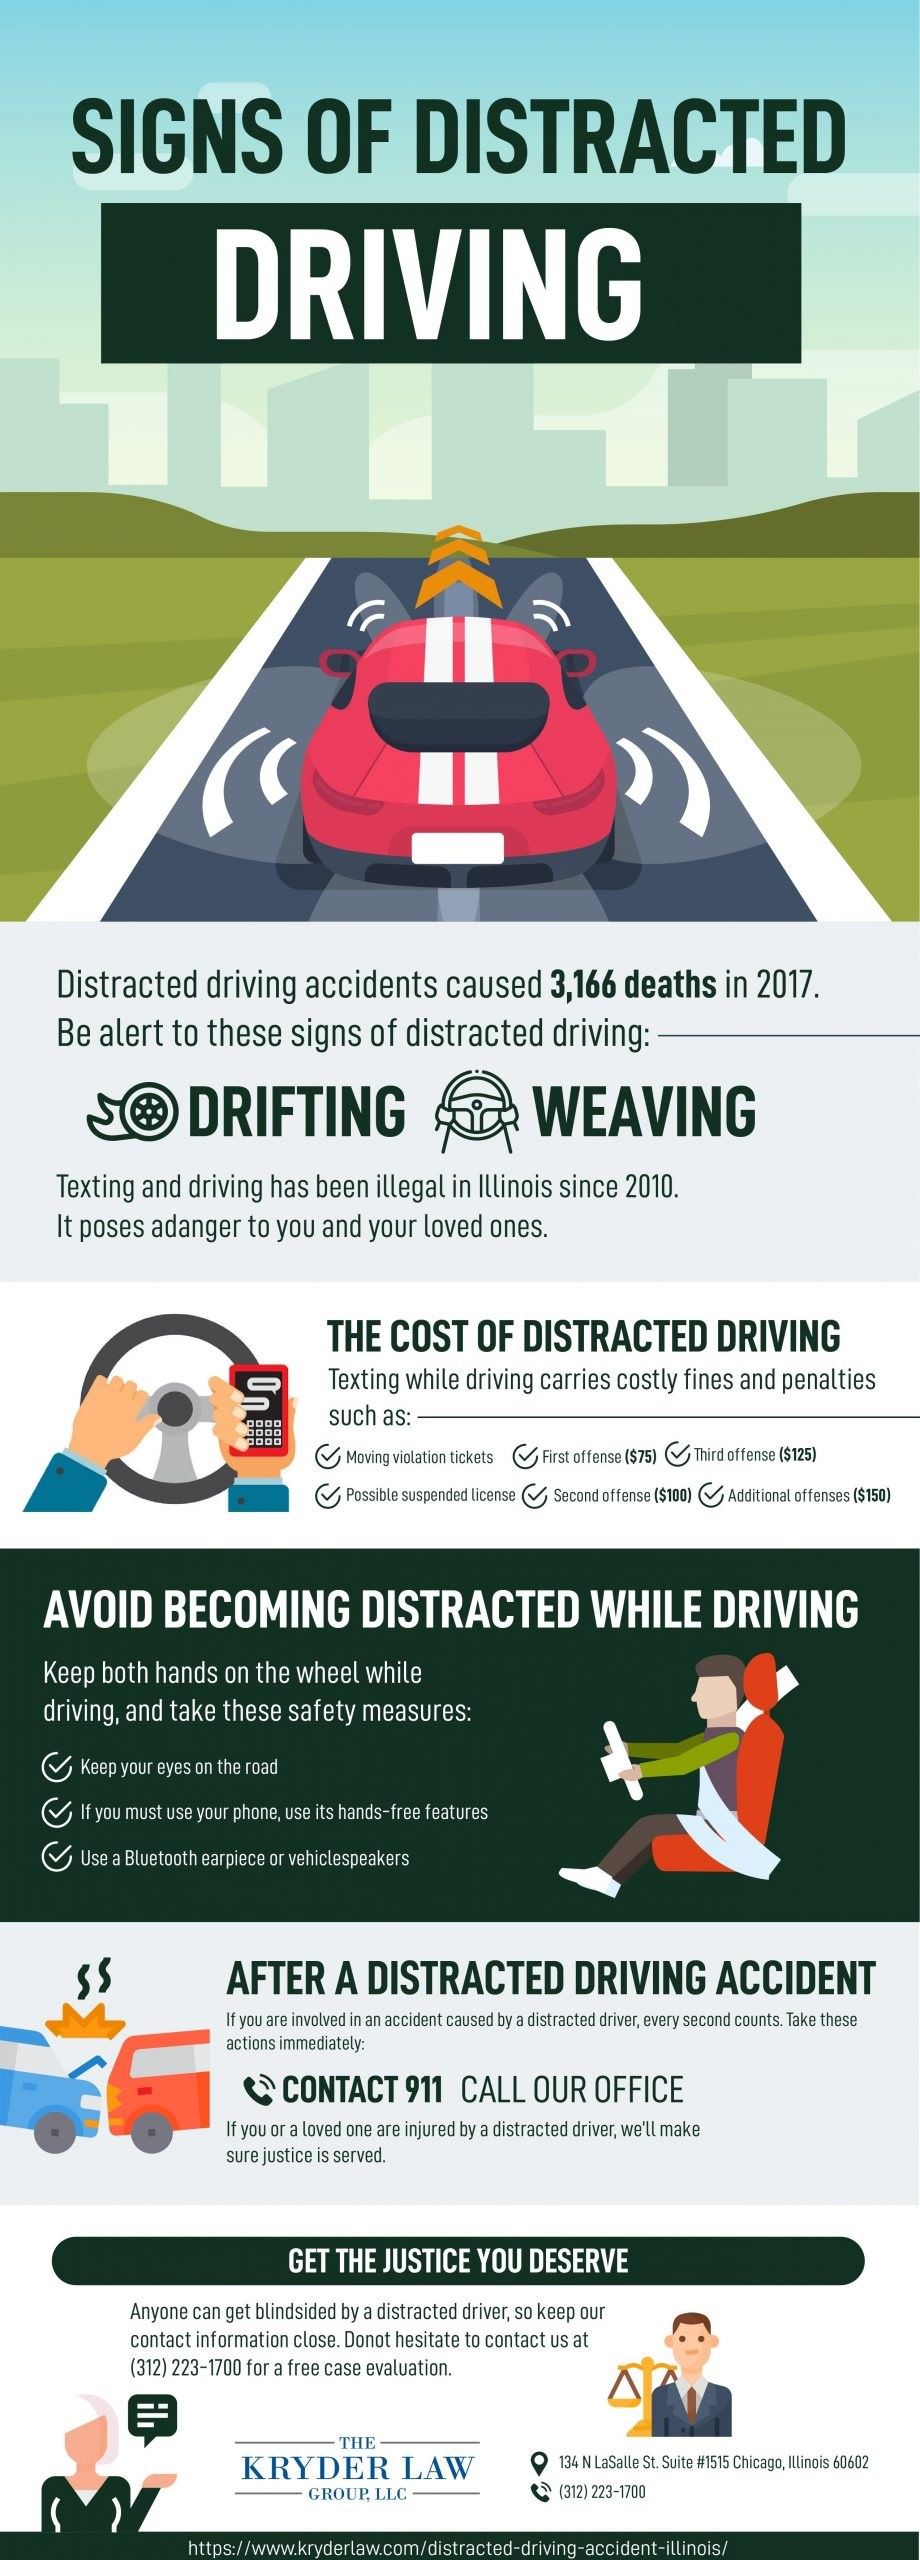 Avoid a Distracted Driving Accident in Illinois